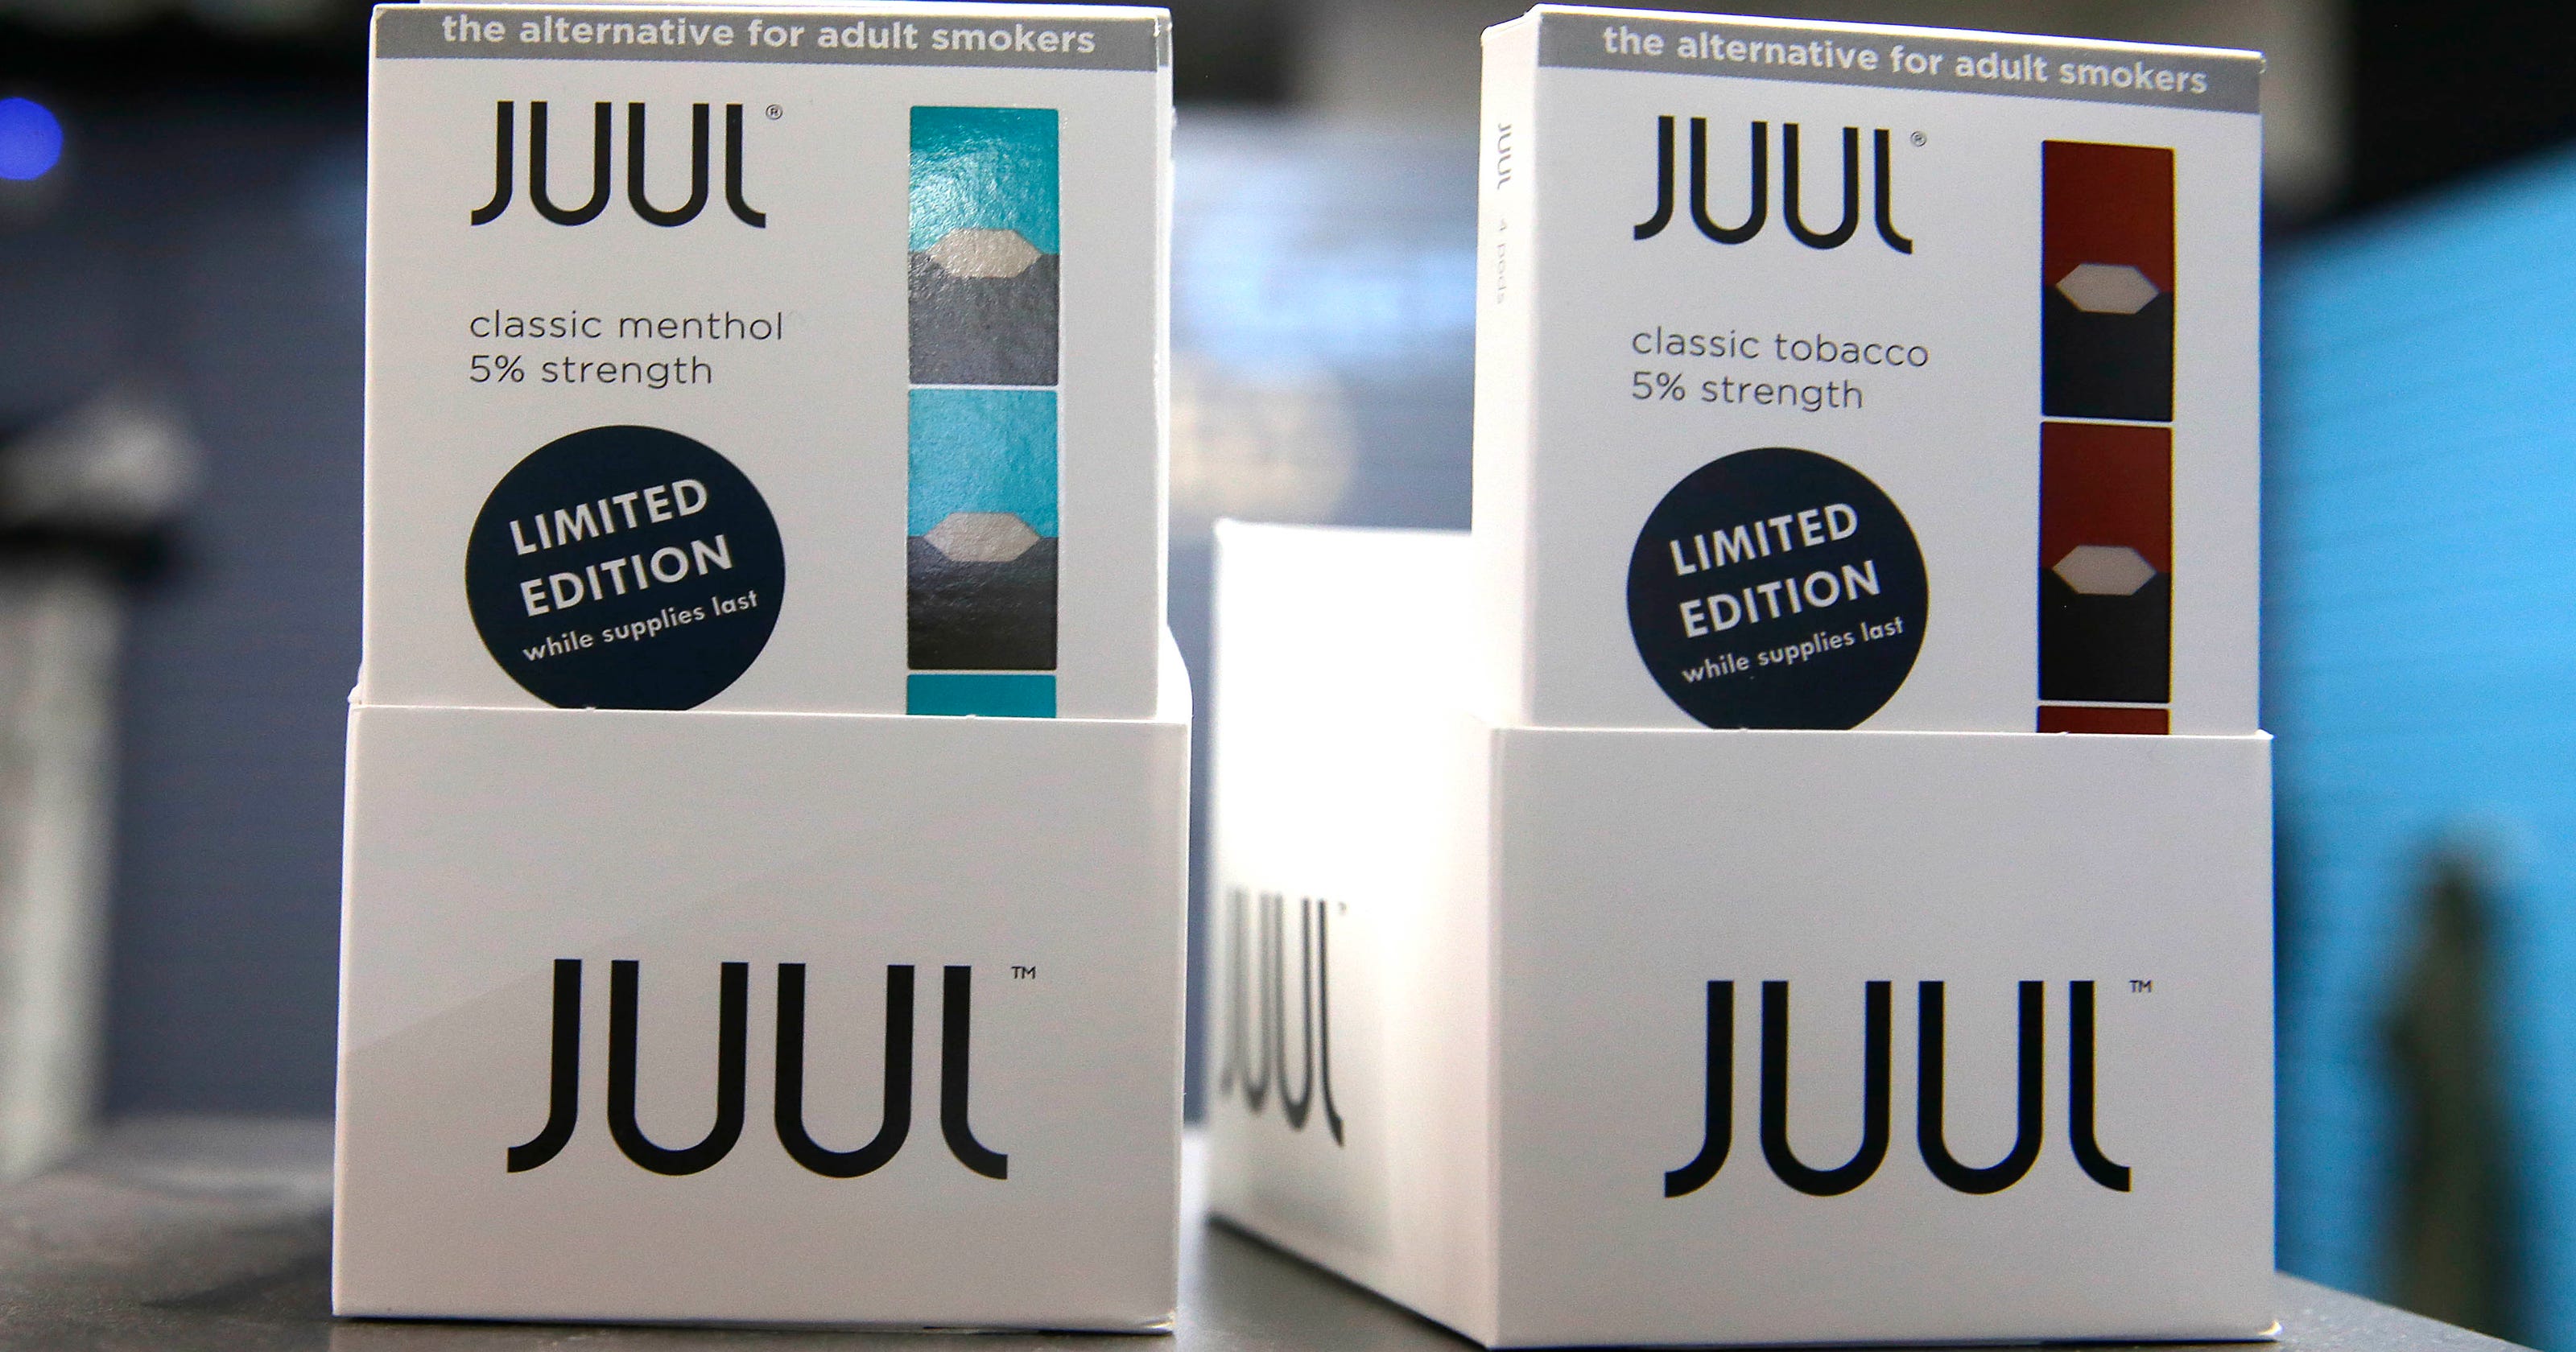 Juul hiring despite CEO ouster, lung illnesses, possible flavor ban